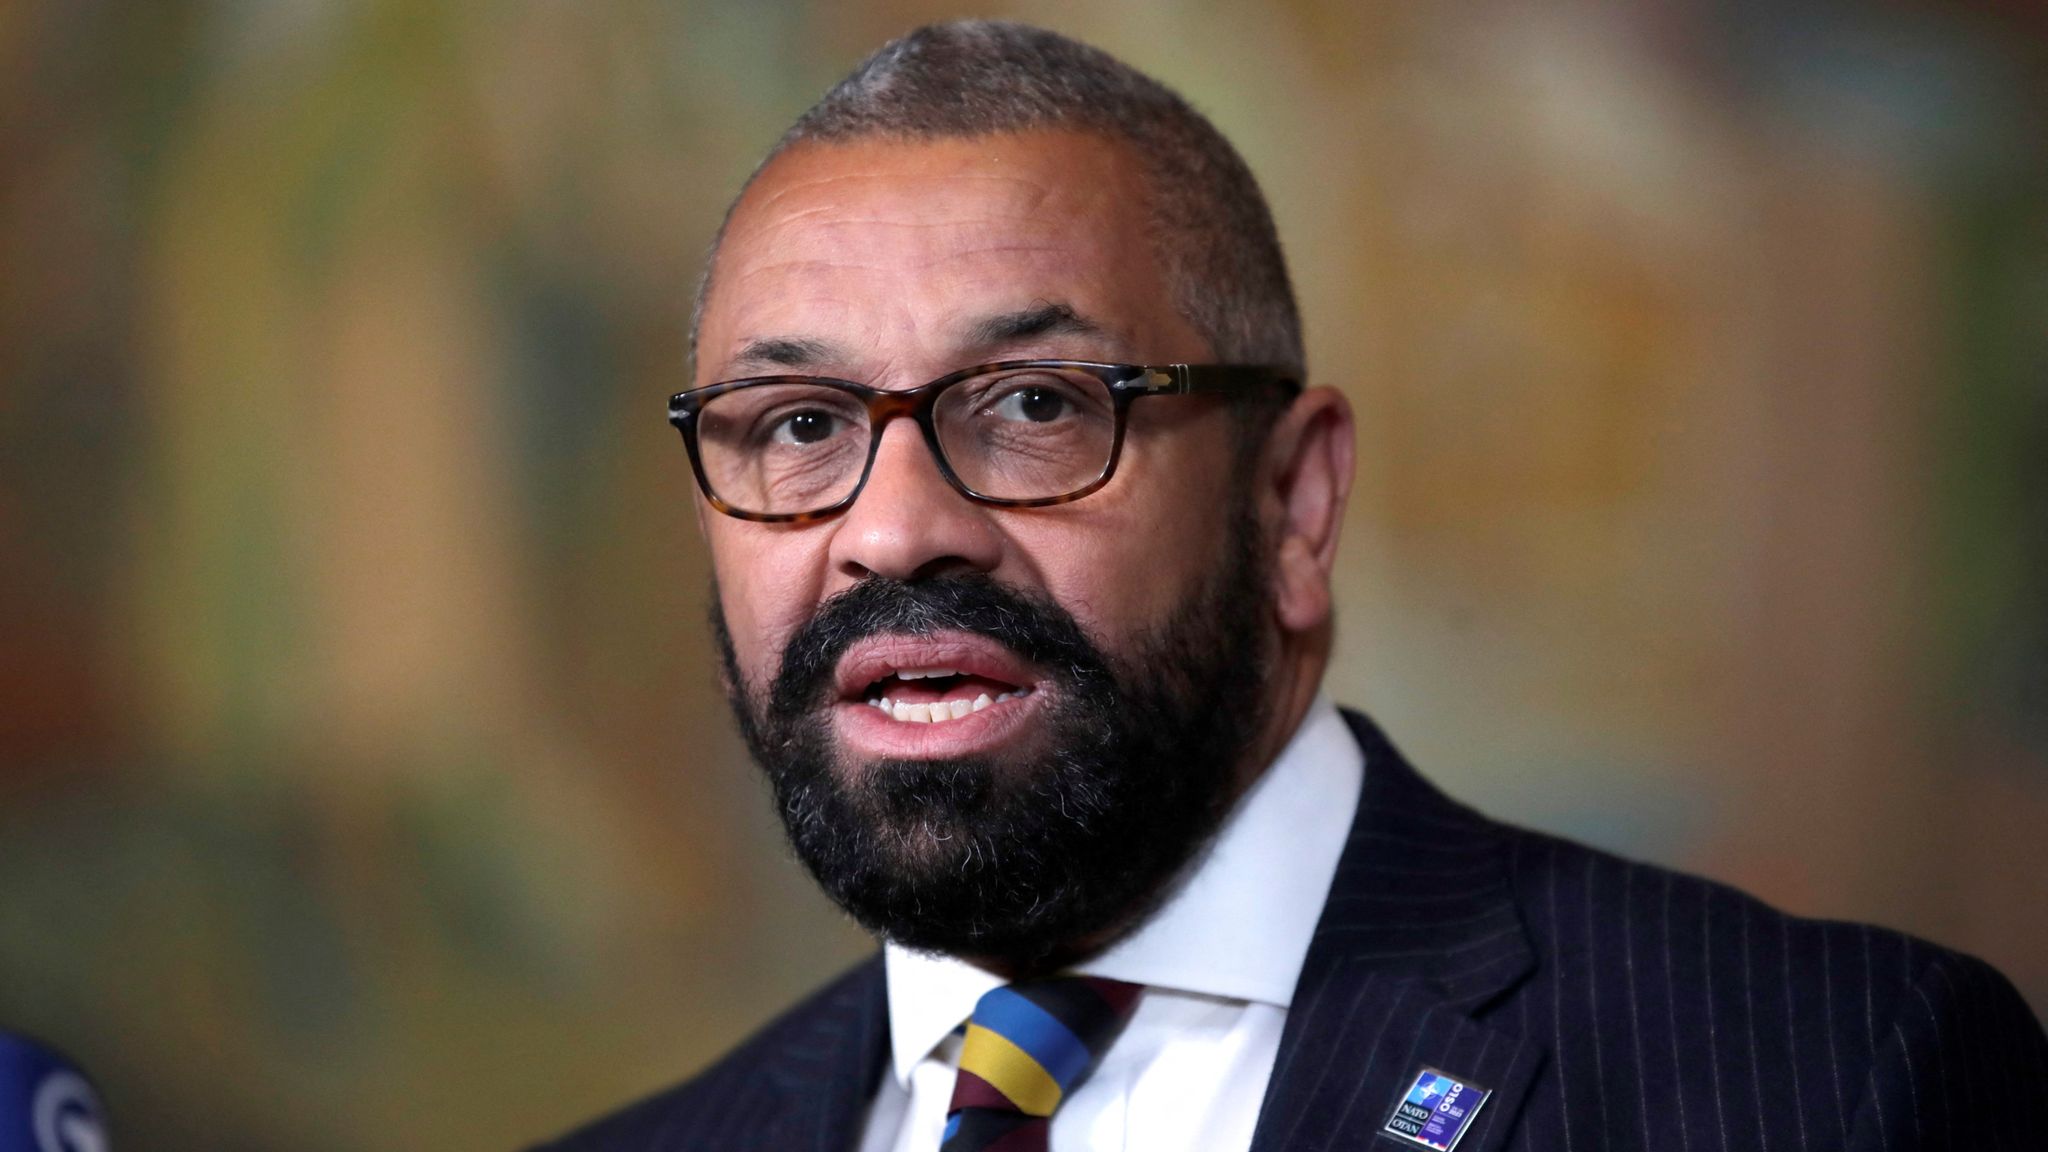 James Cleverly heading to China to 'strengthen channels of communication'